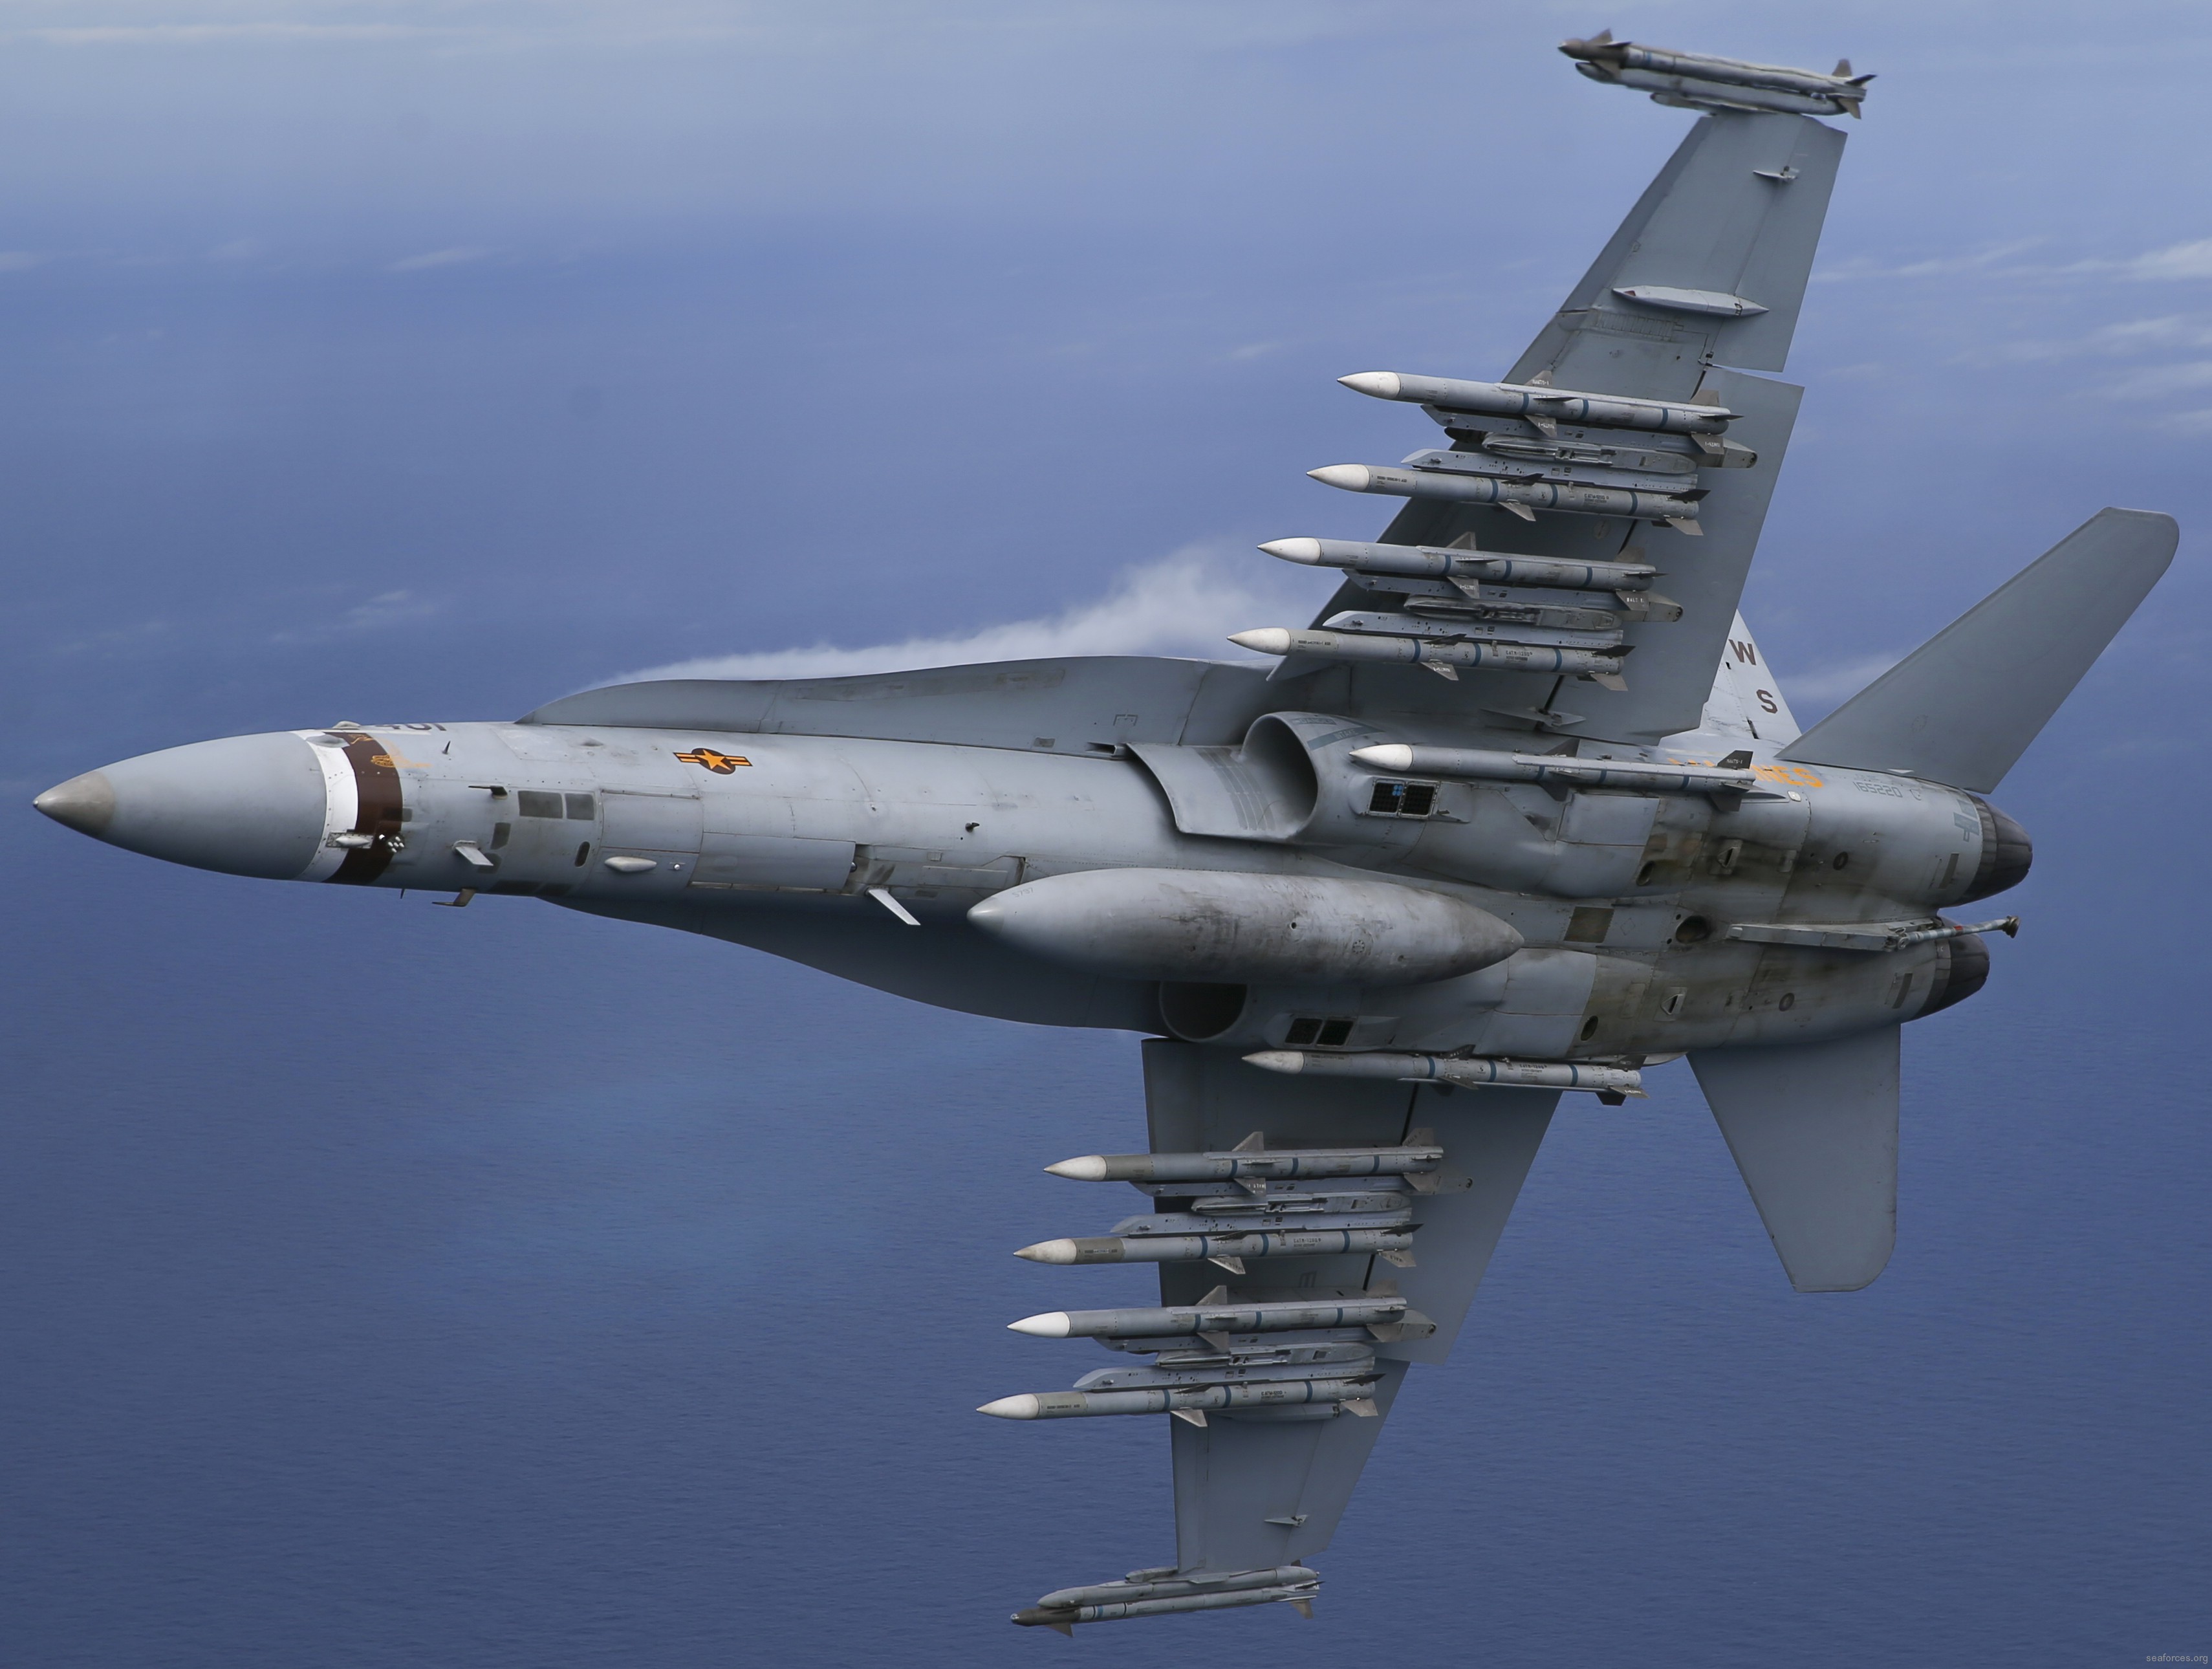 vmfa-323 death rattlers marine fighter attack squadron f/a-18c hornet 08 aim-120 amraam missile